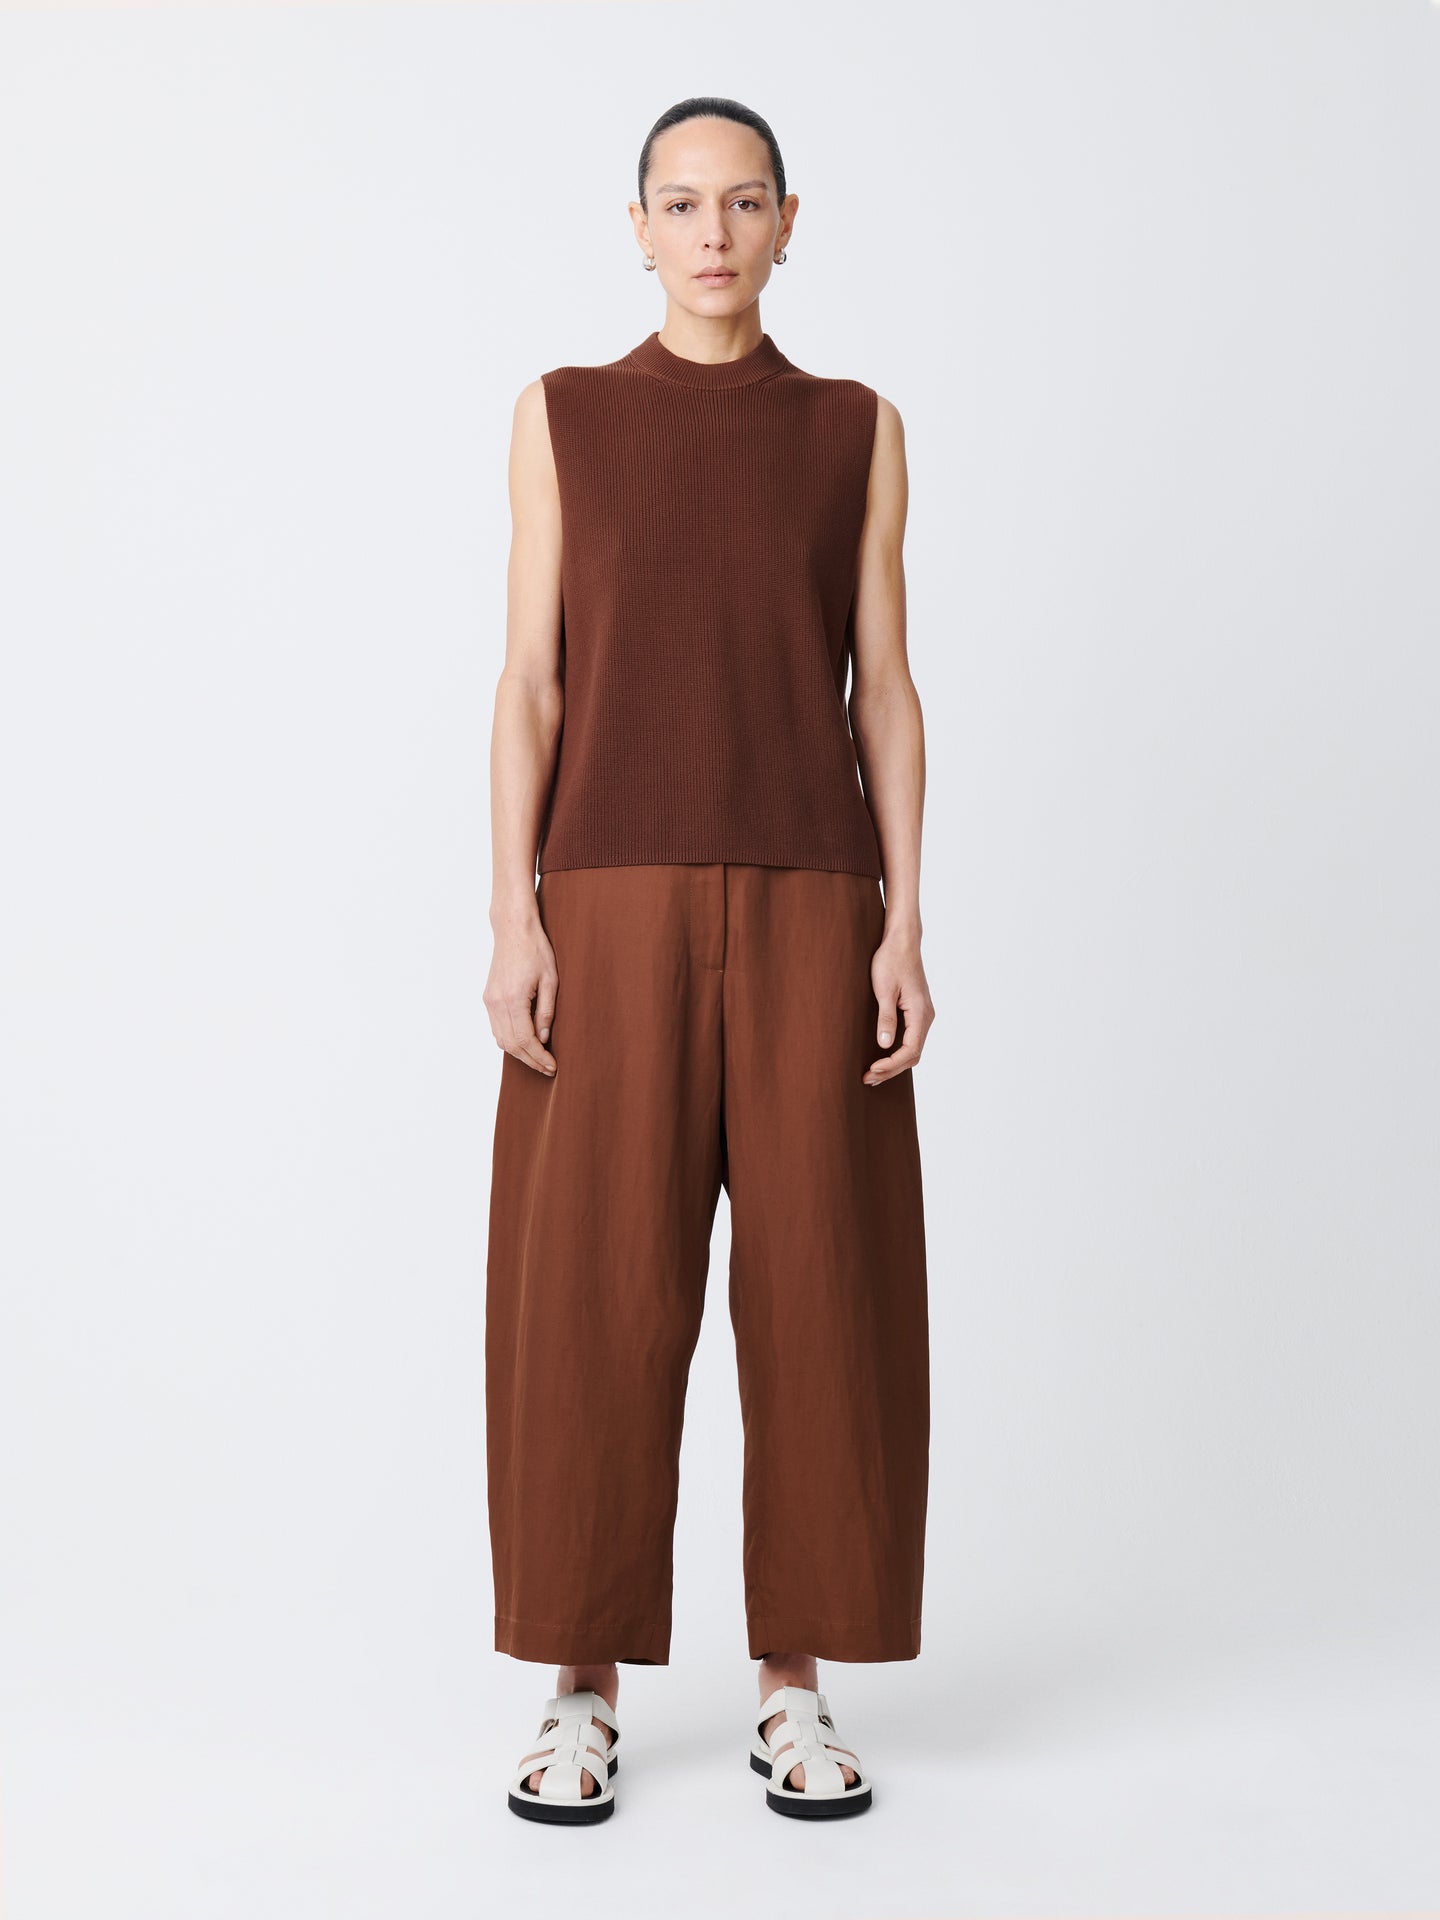 Chalco Pant in Carob Brown